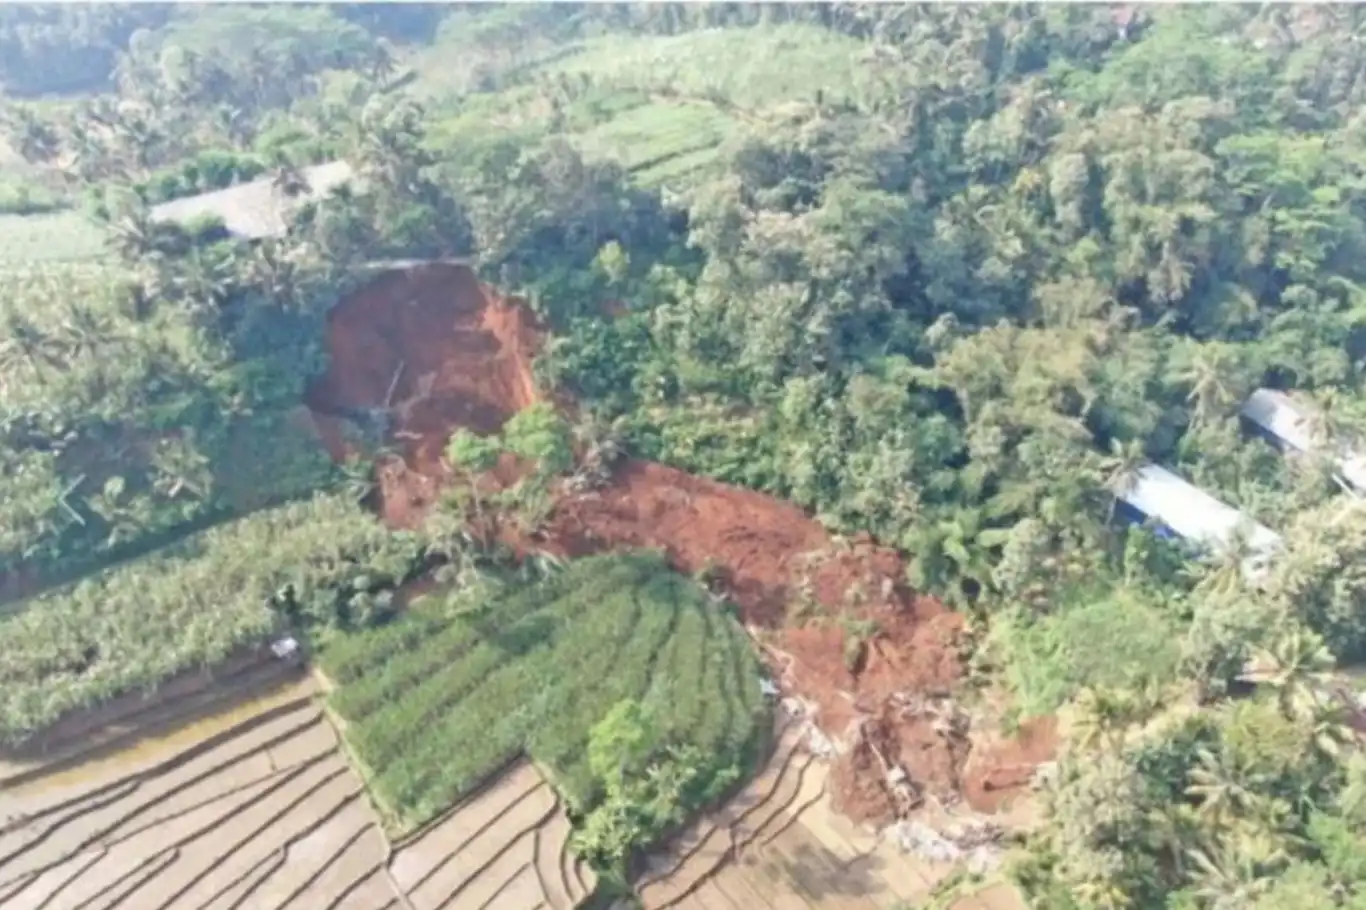 Indonesia: Landslide in East Java kills two, one person still missing